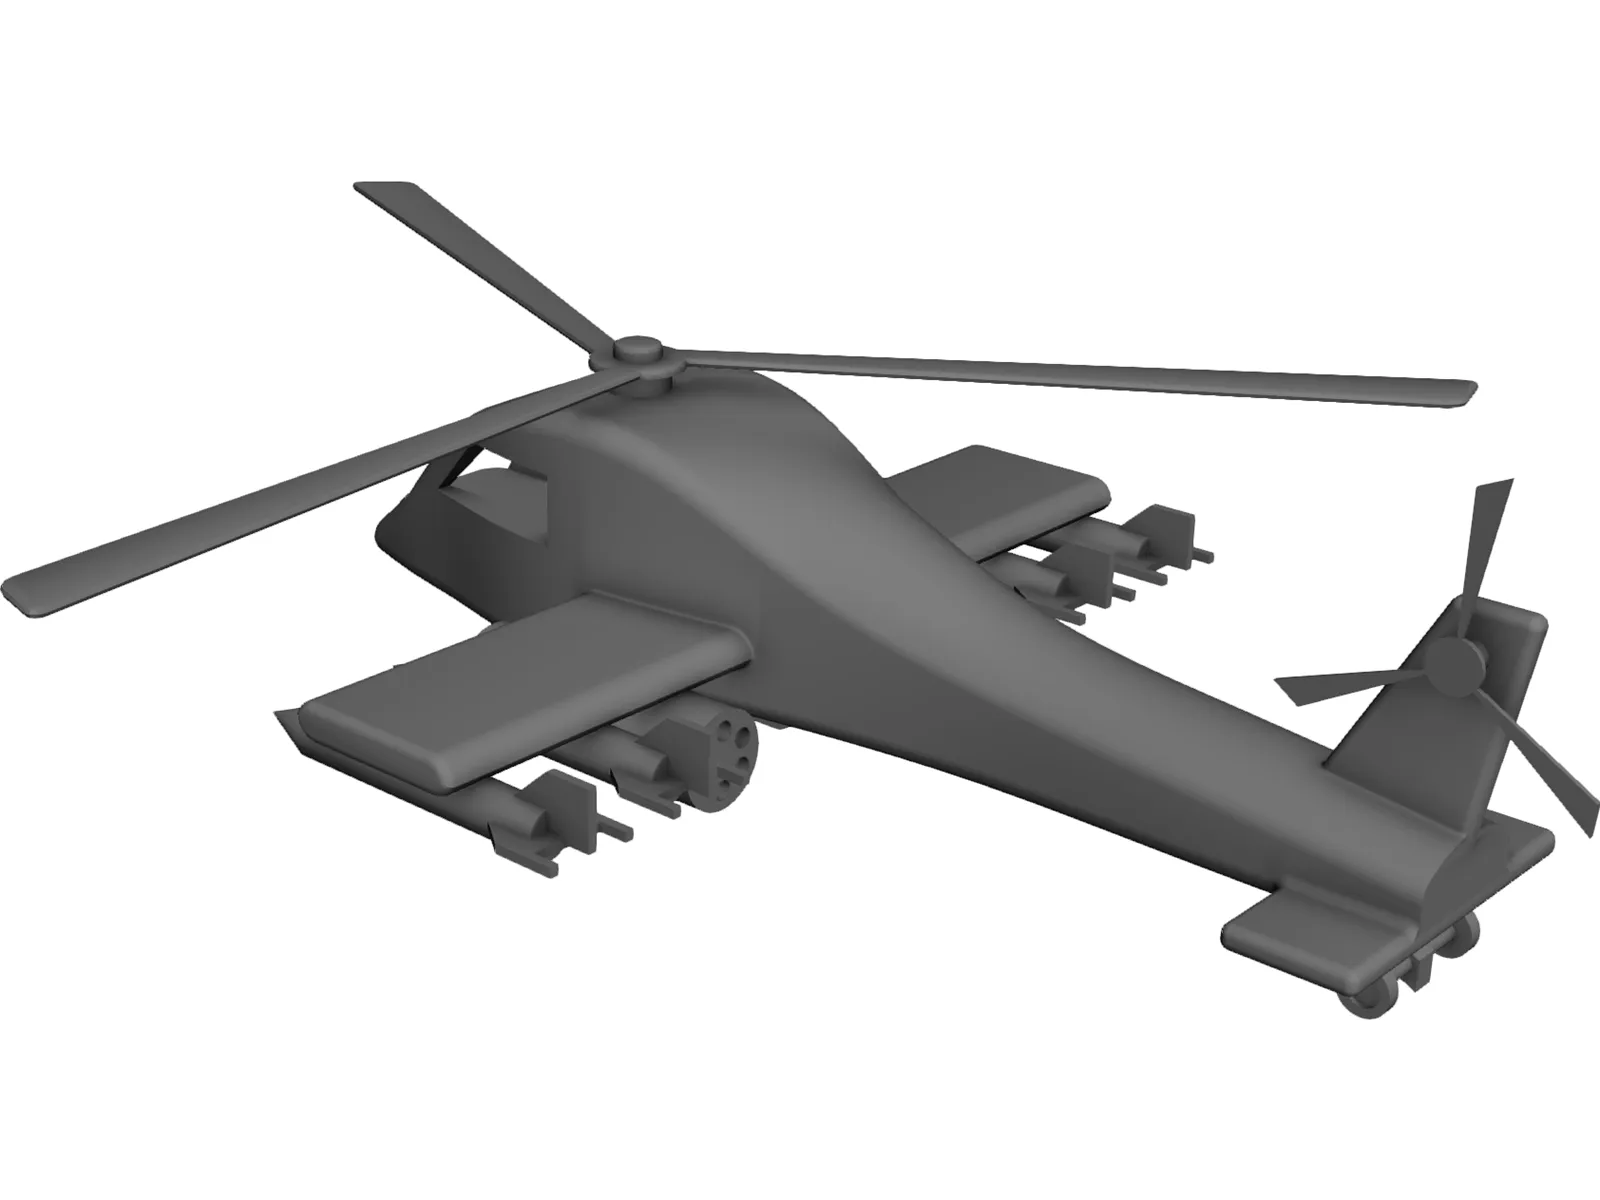 Toy Helicopter 3D Model